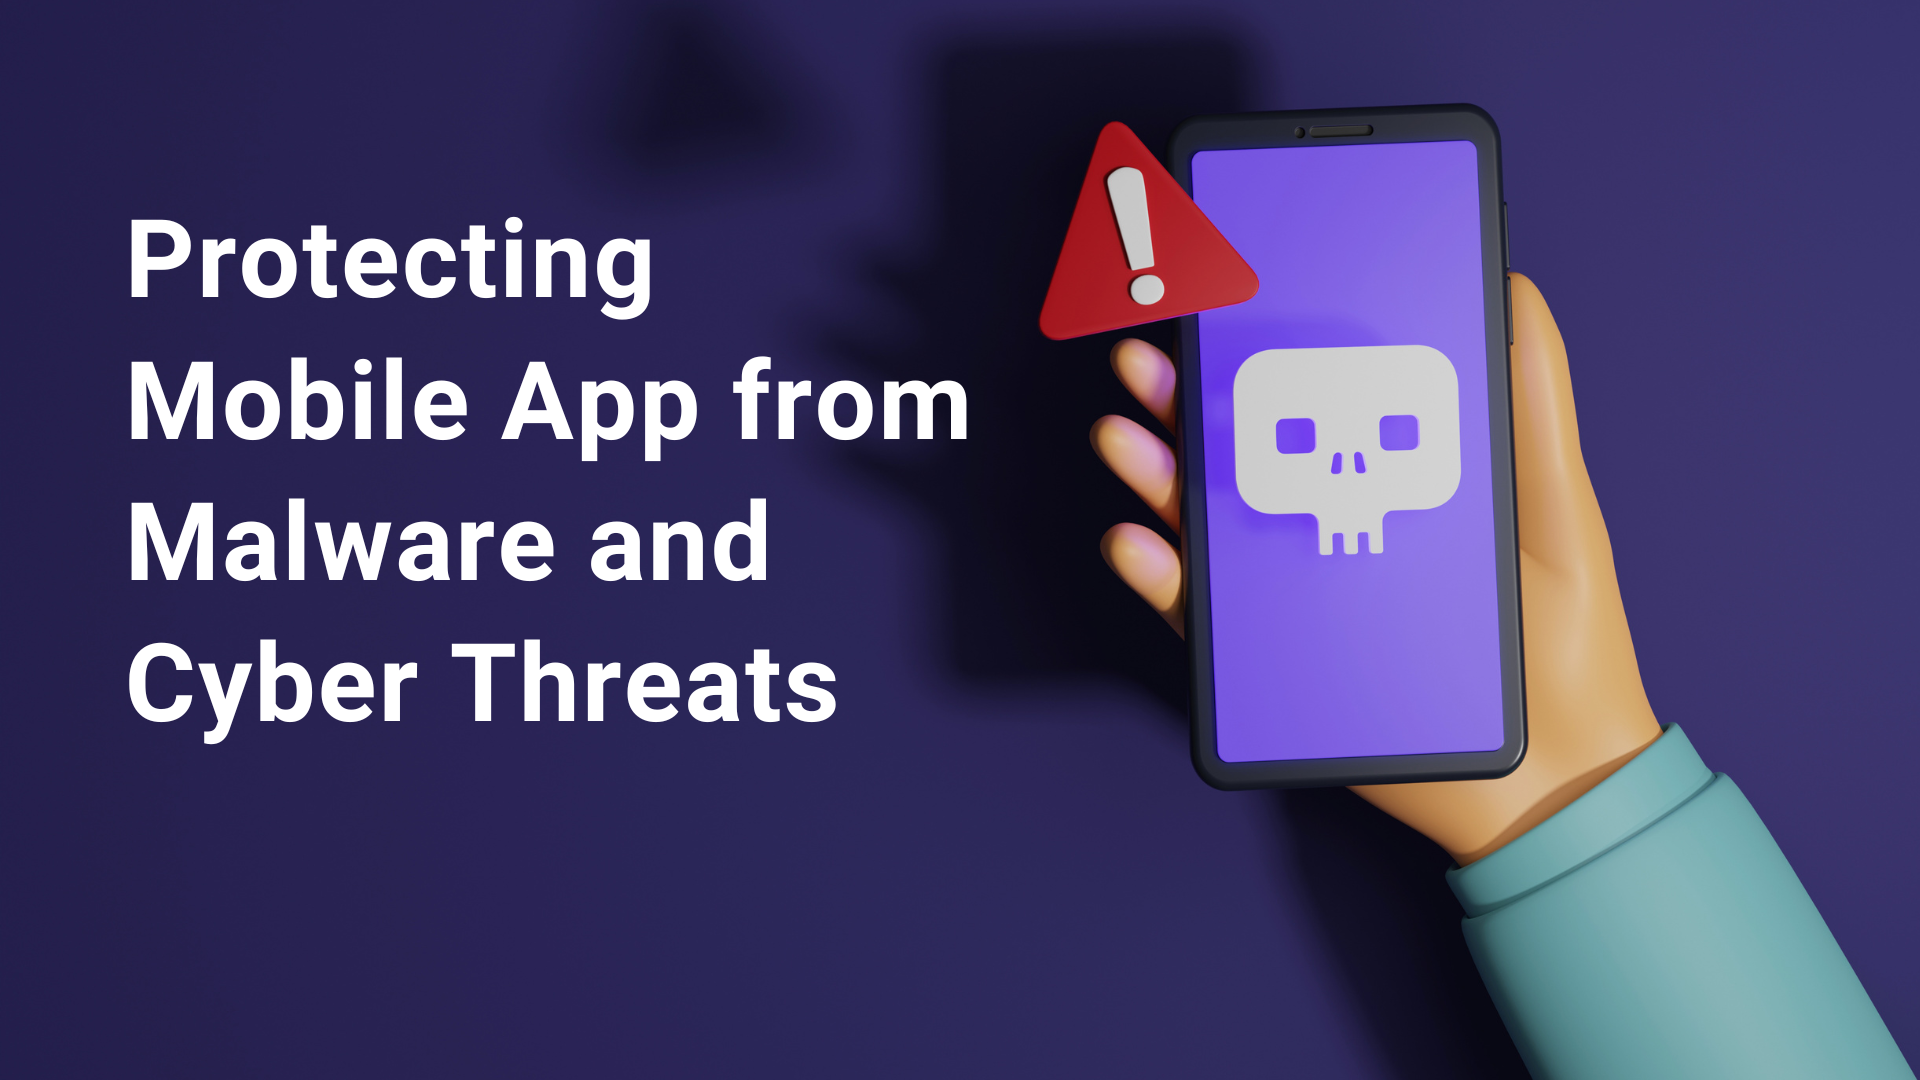 Protecting Mobile App from Malware and Cyber Threats